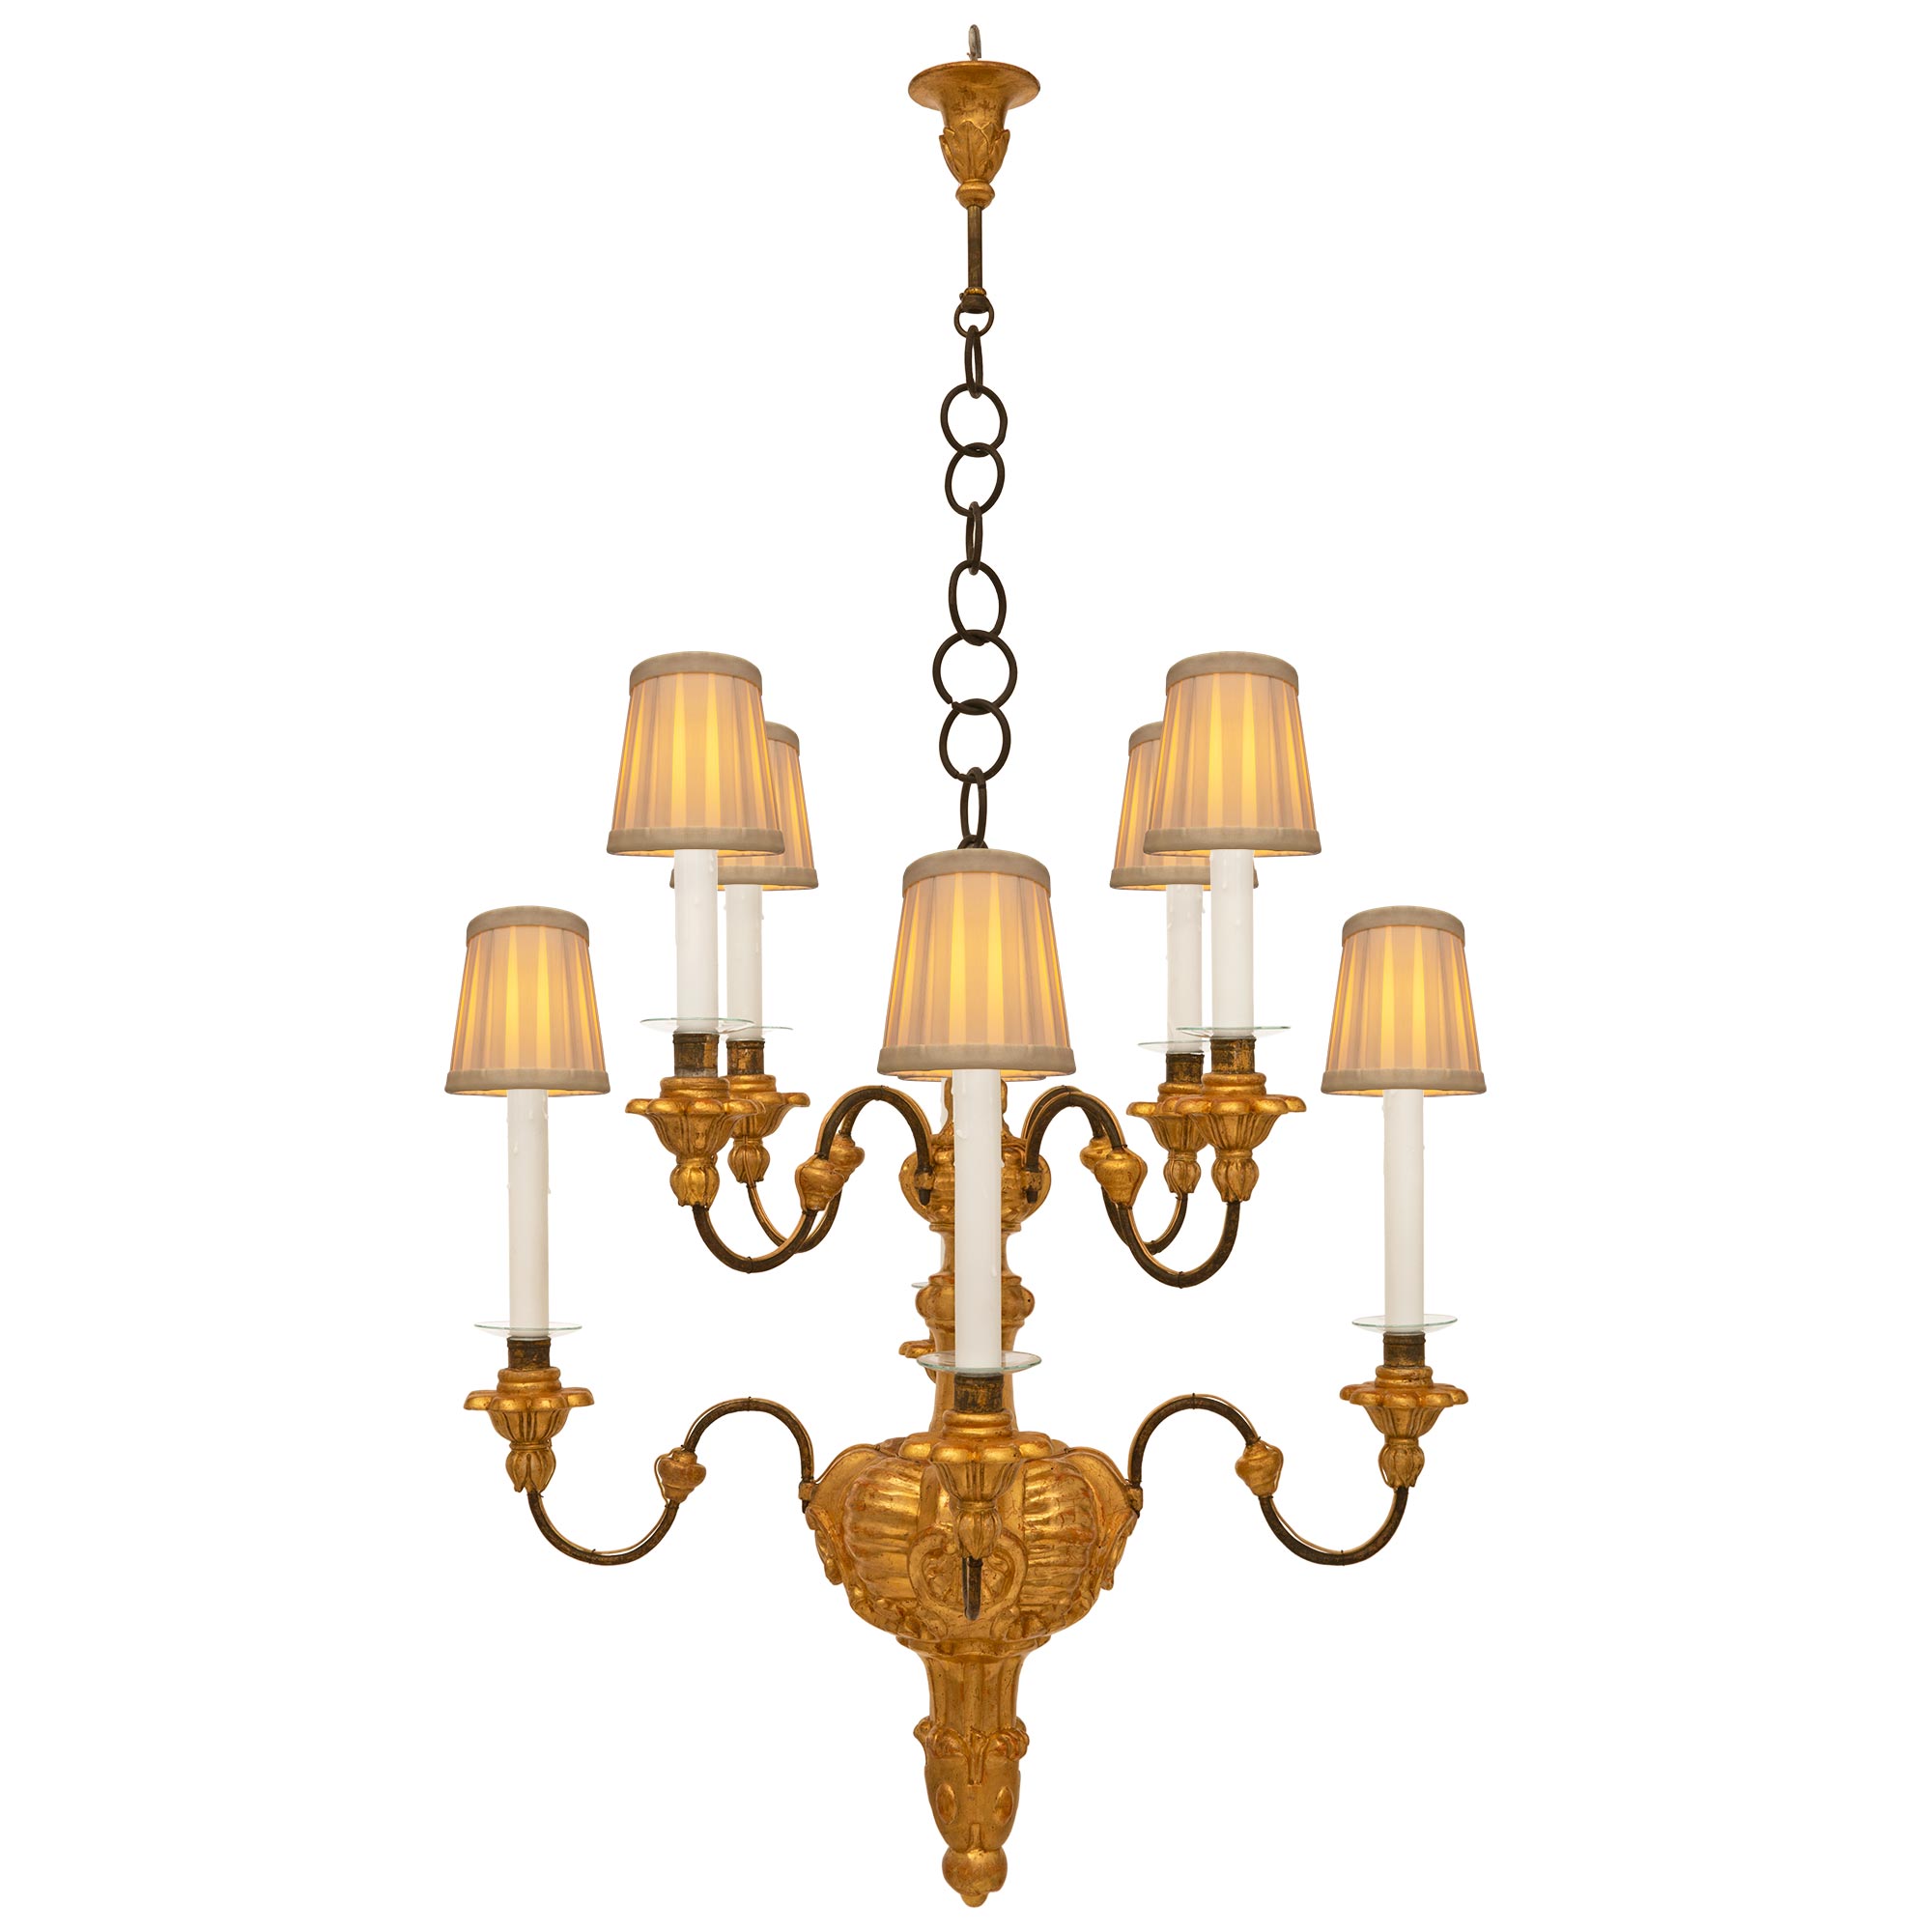 Italian Early 18th Century Giltwood and Wrought Iron Chandelier For Sale